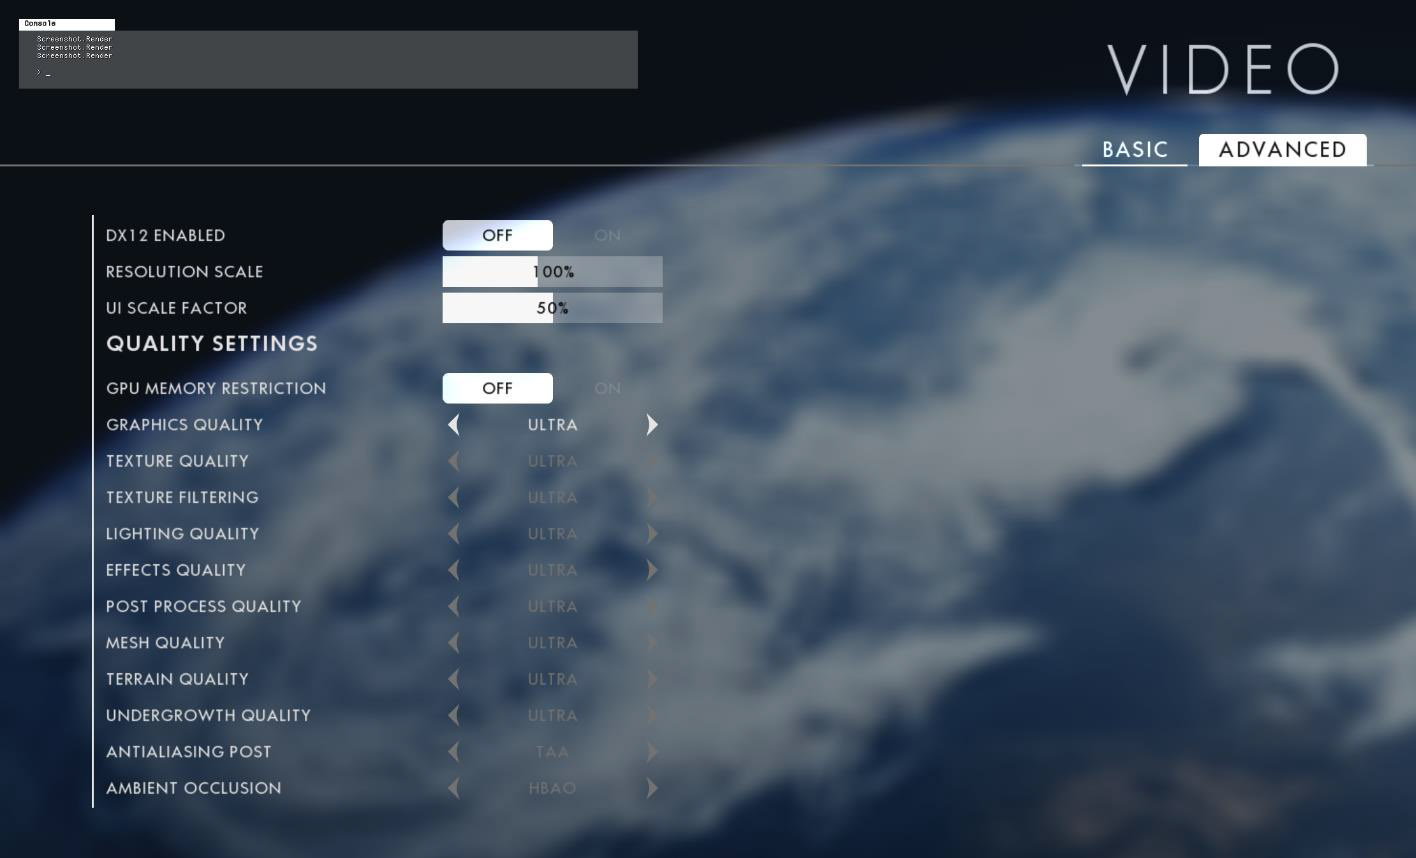 Battlefield 1 PC Performance and Quality Report